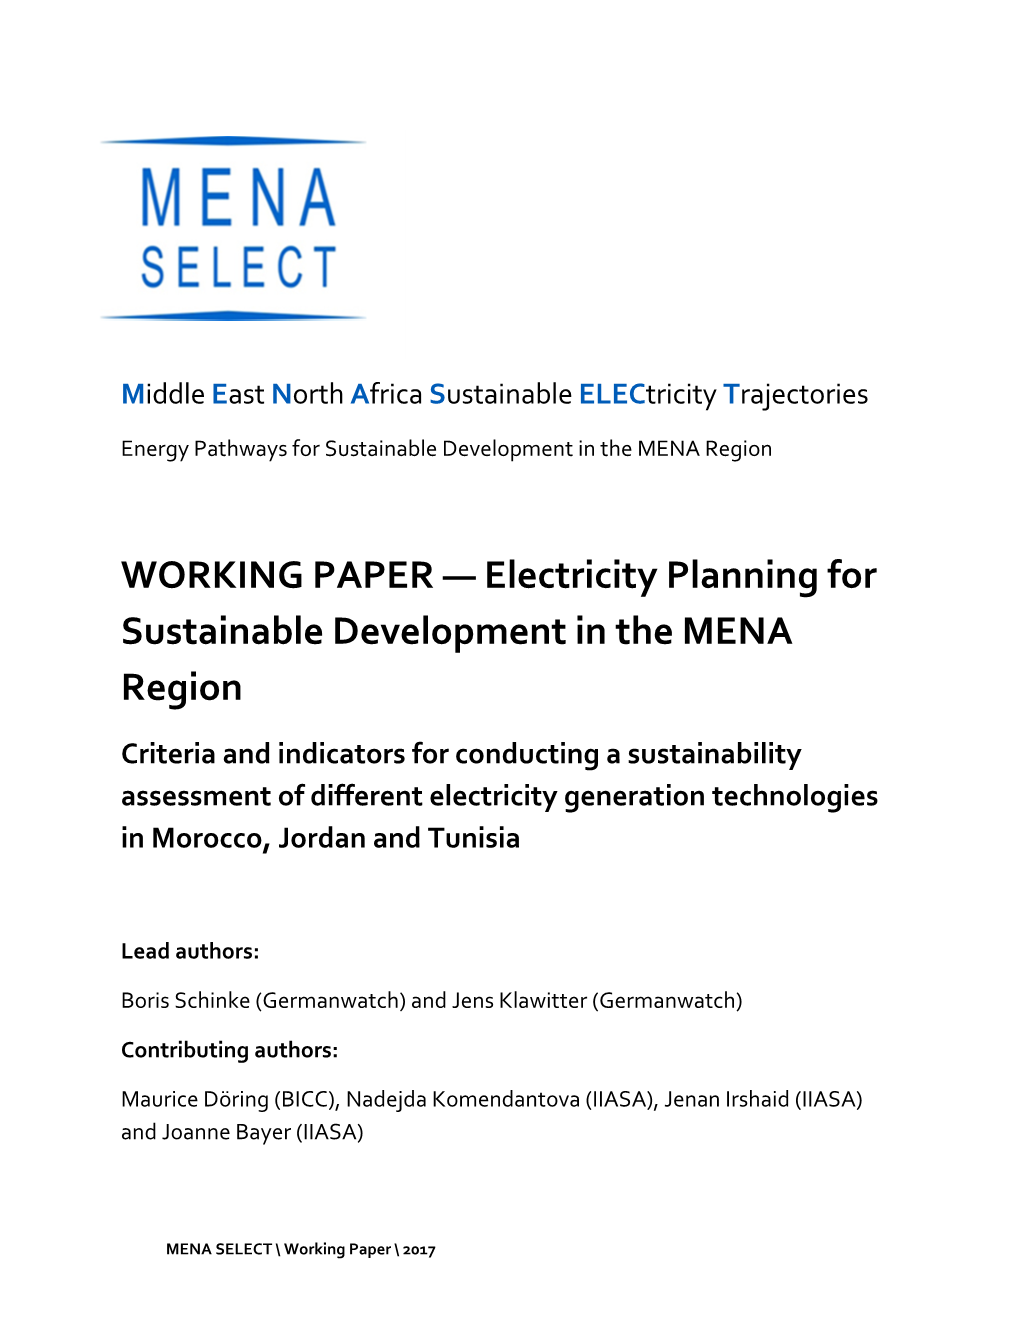 Electricity Planning for Sustainable Development in the MENA Region